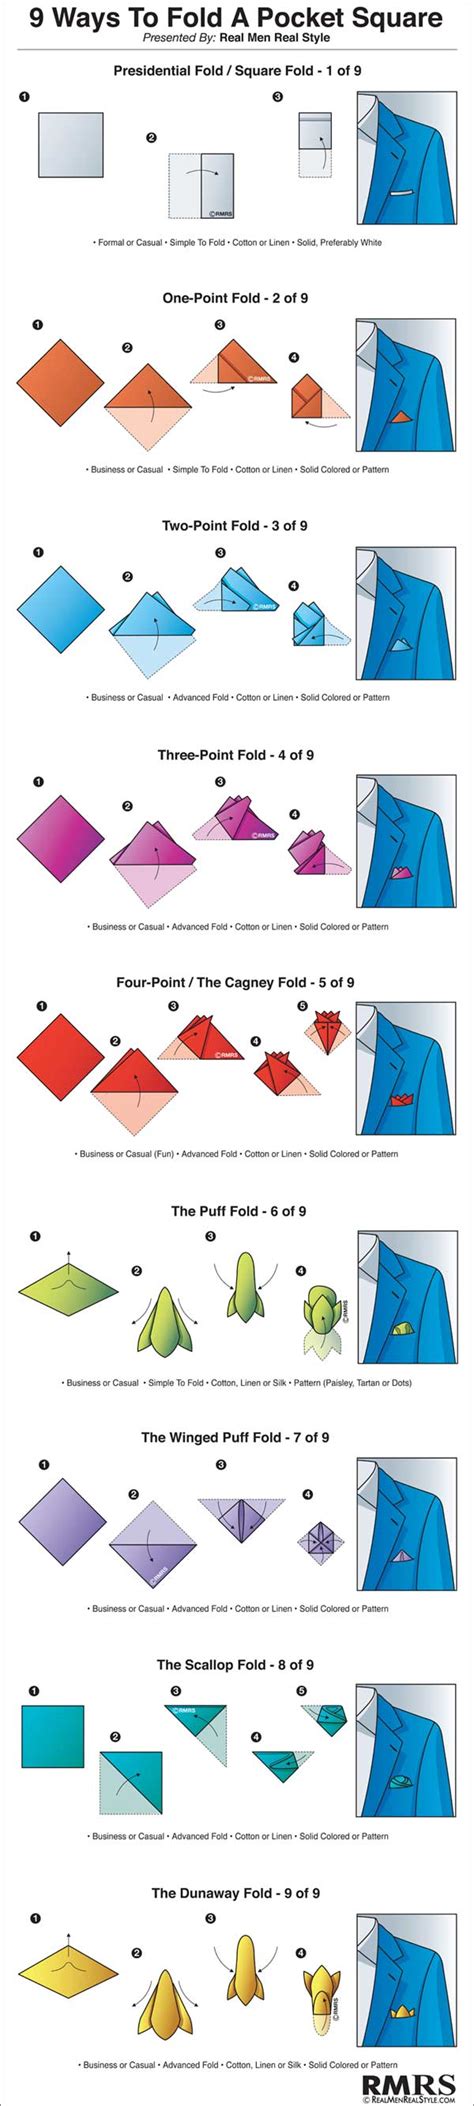 If you haven't tried accessorizing your suit, shirt, and tie with a pocket square then the seven reasons below should. 9 Ways to Fold a Pocket Square Infographic